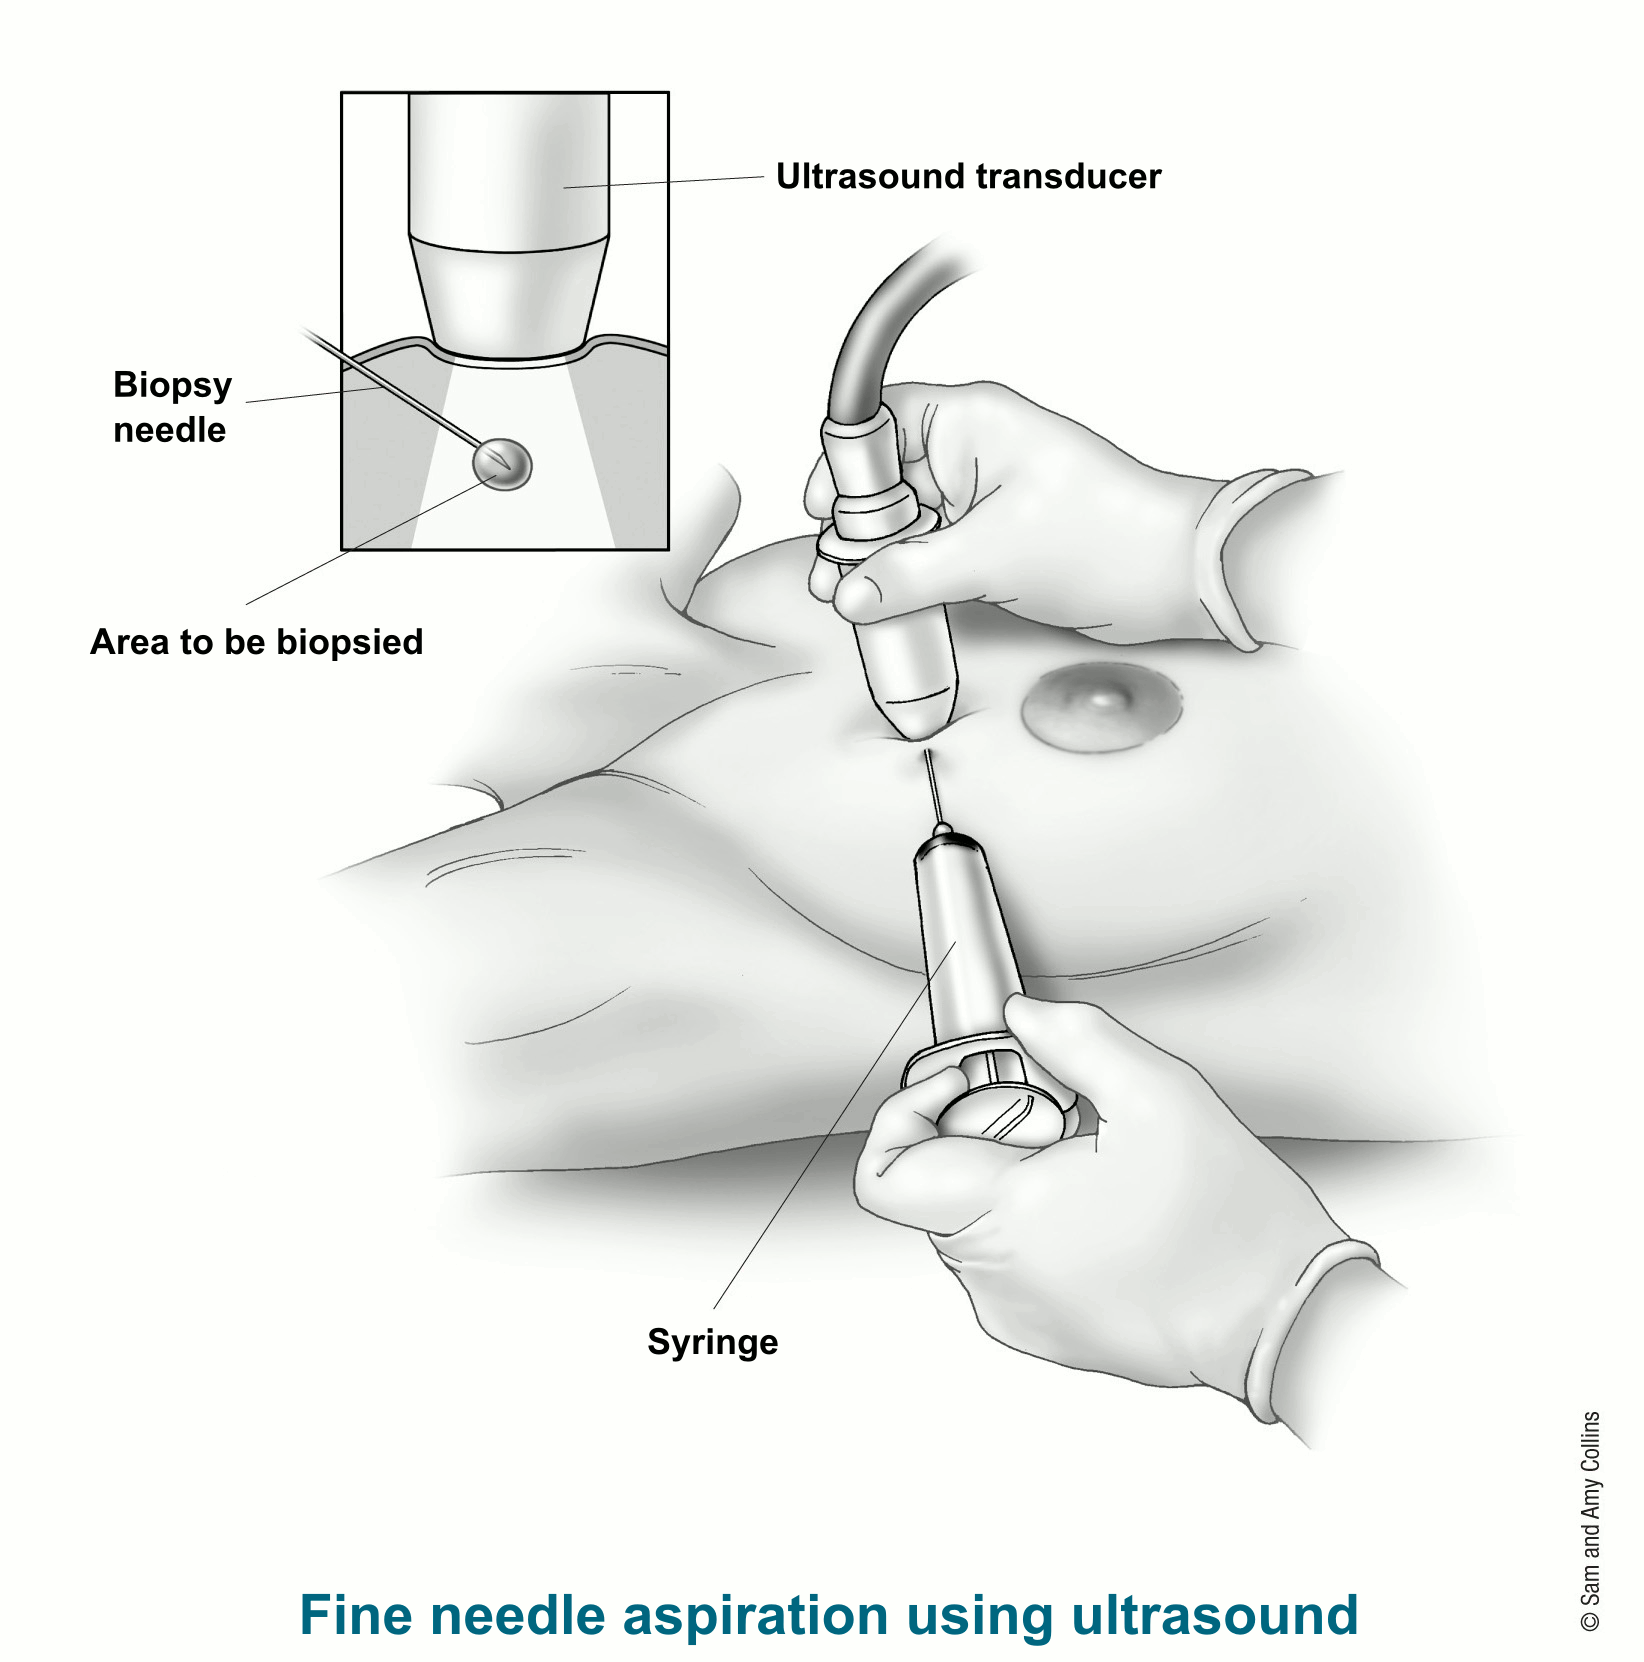 illustration showing a fine needle aspiration using ultrasound including detail of the biopsy needle, area to be biopsied and the ultrasound transducer